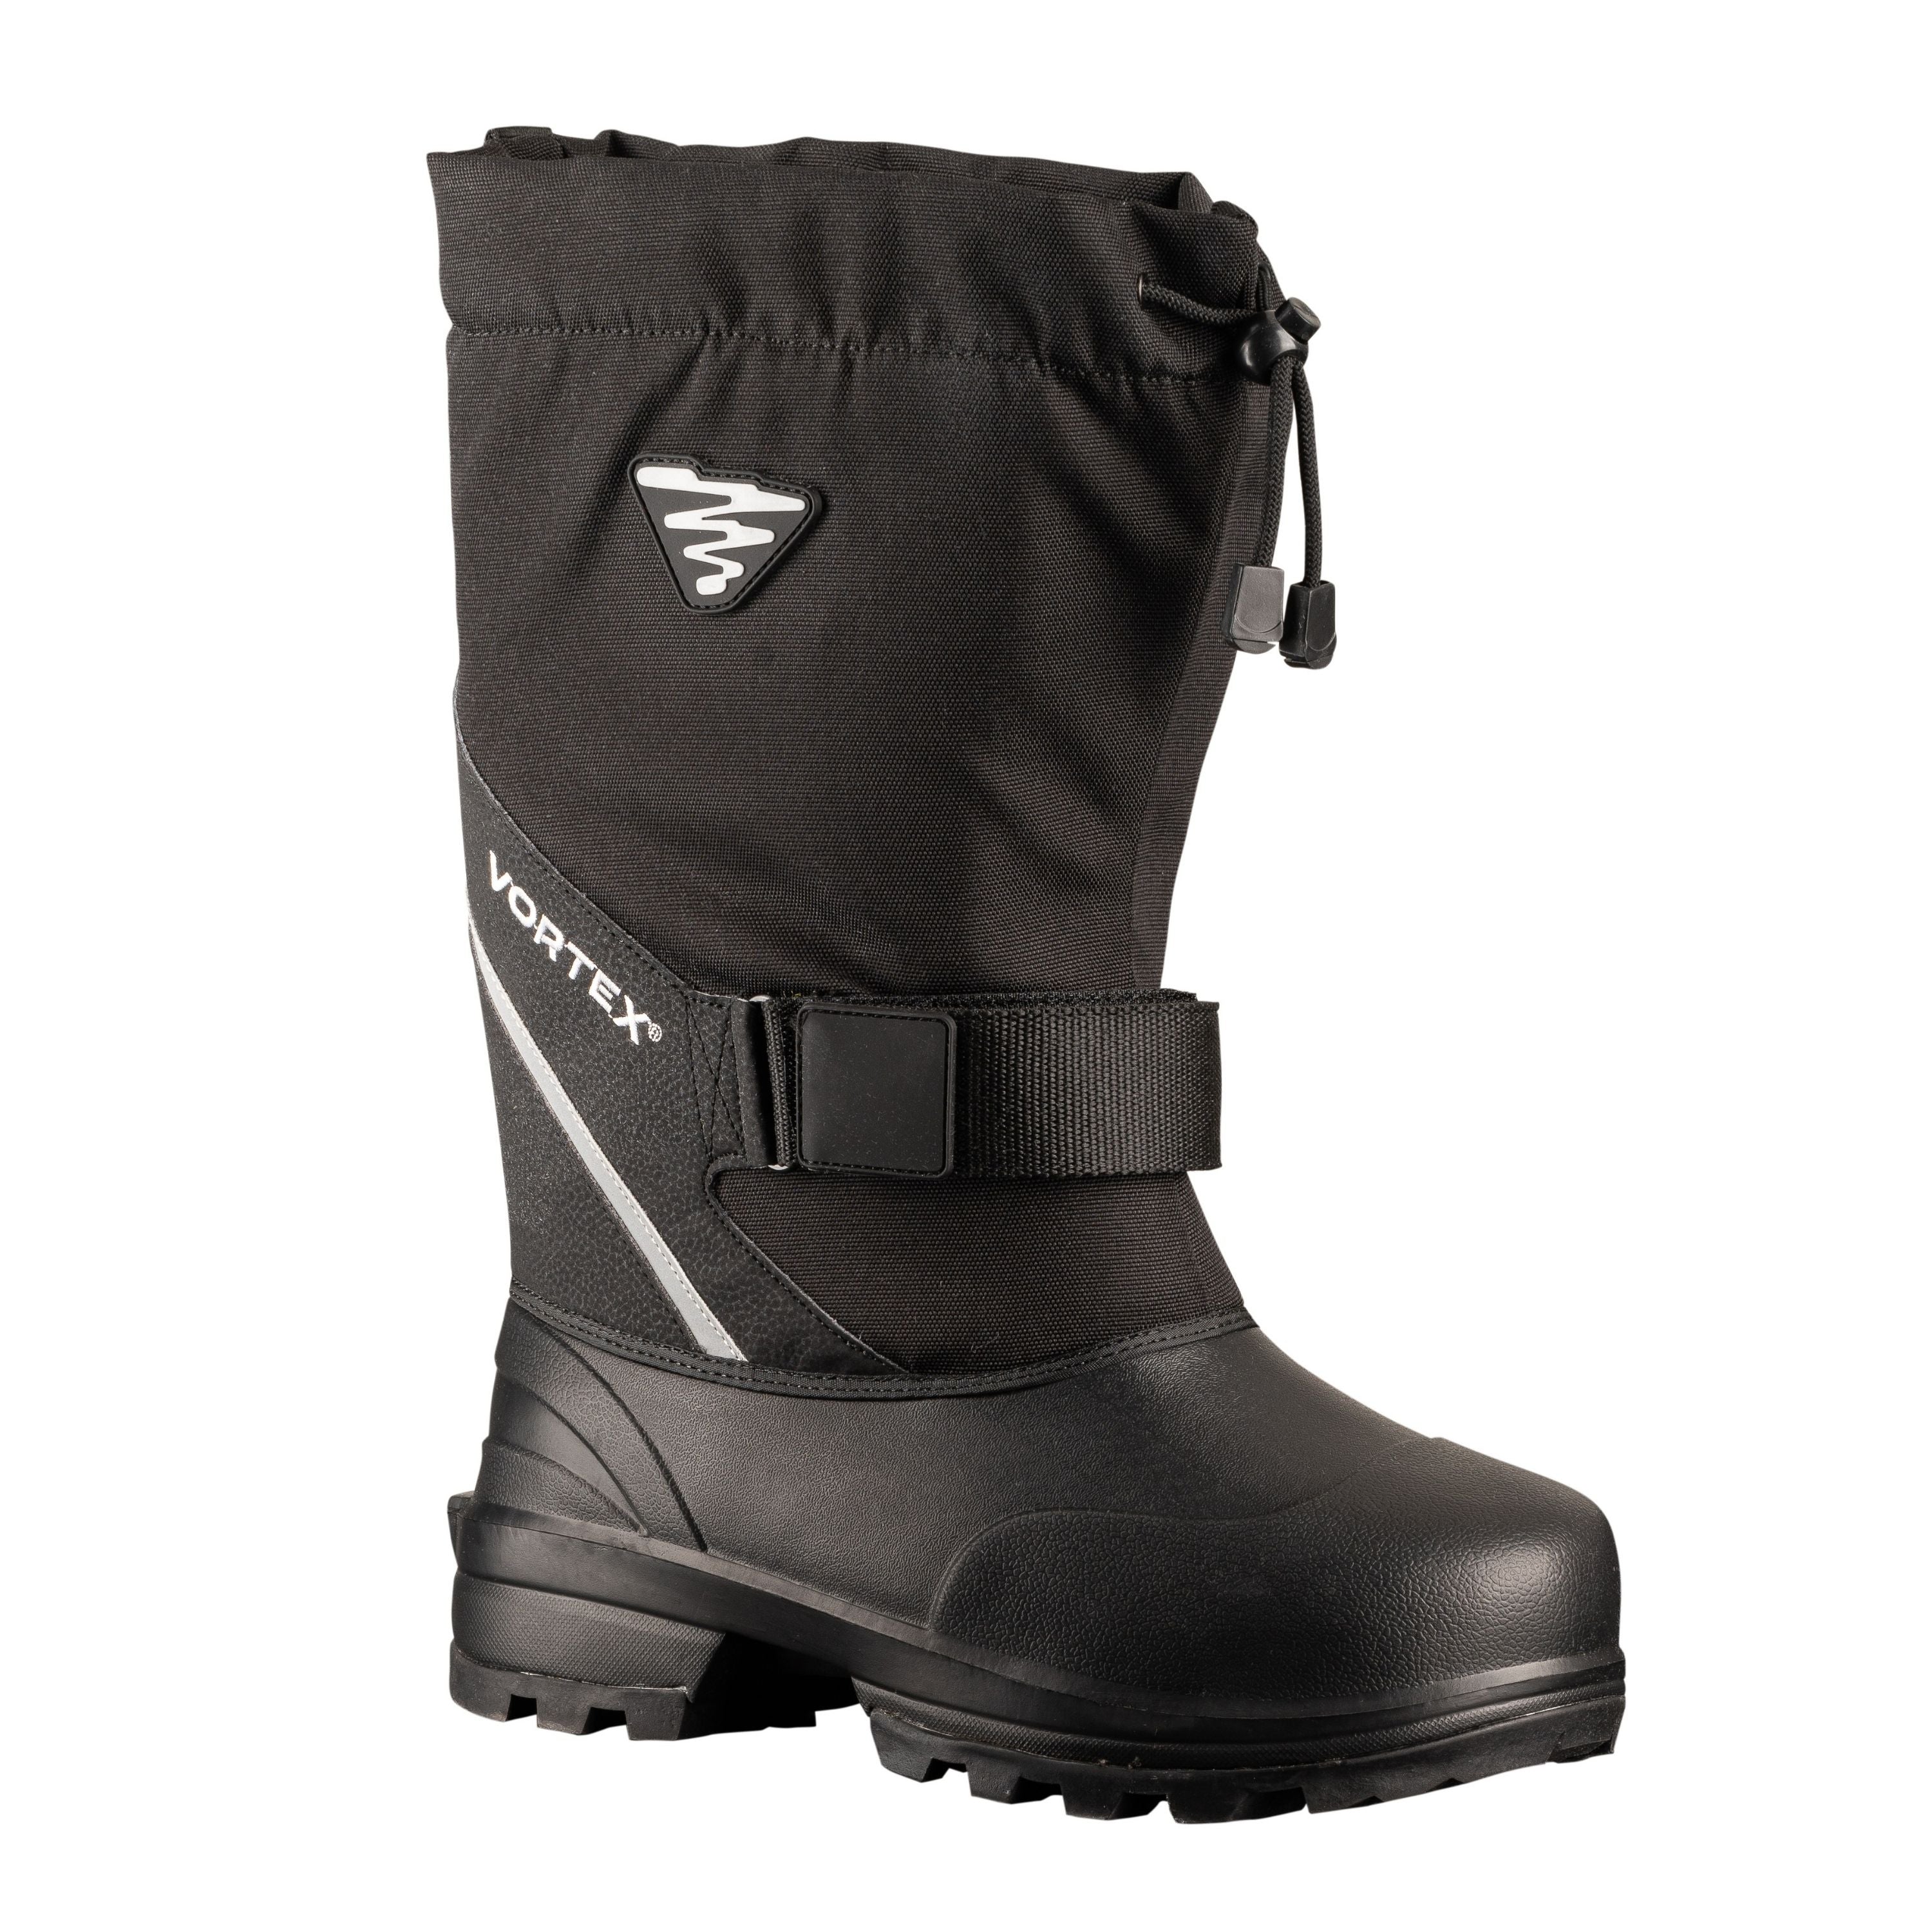 "Storm" Winter boots - Adult's